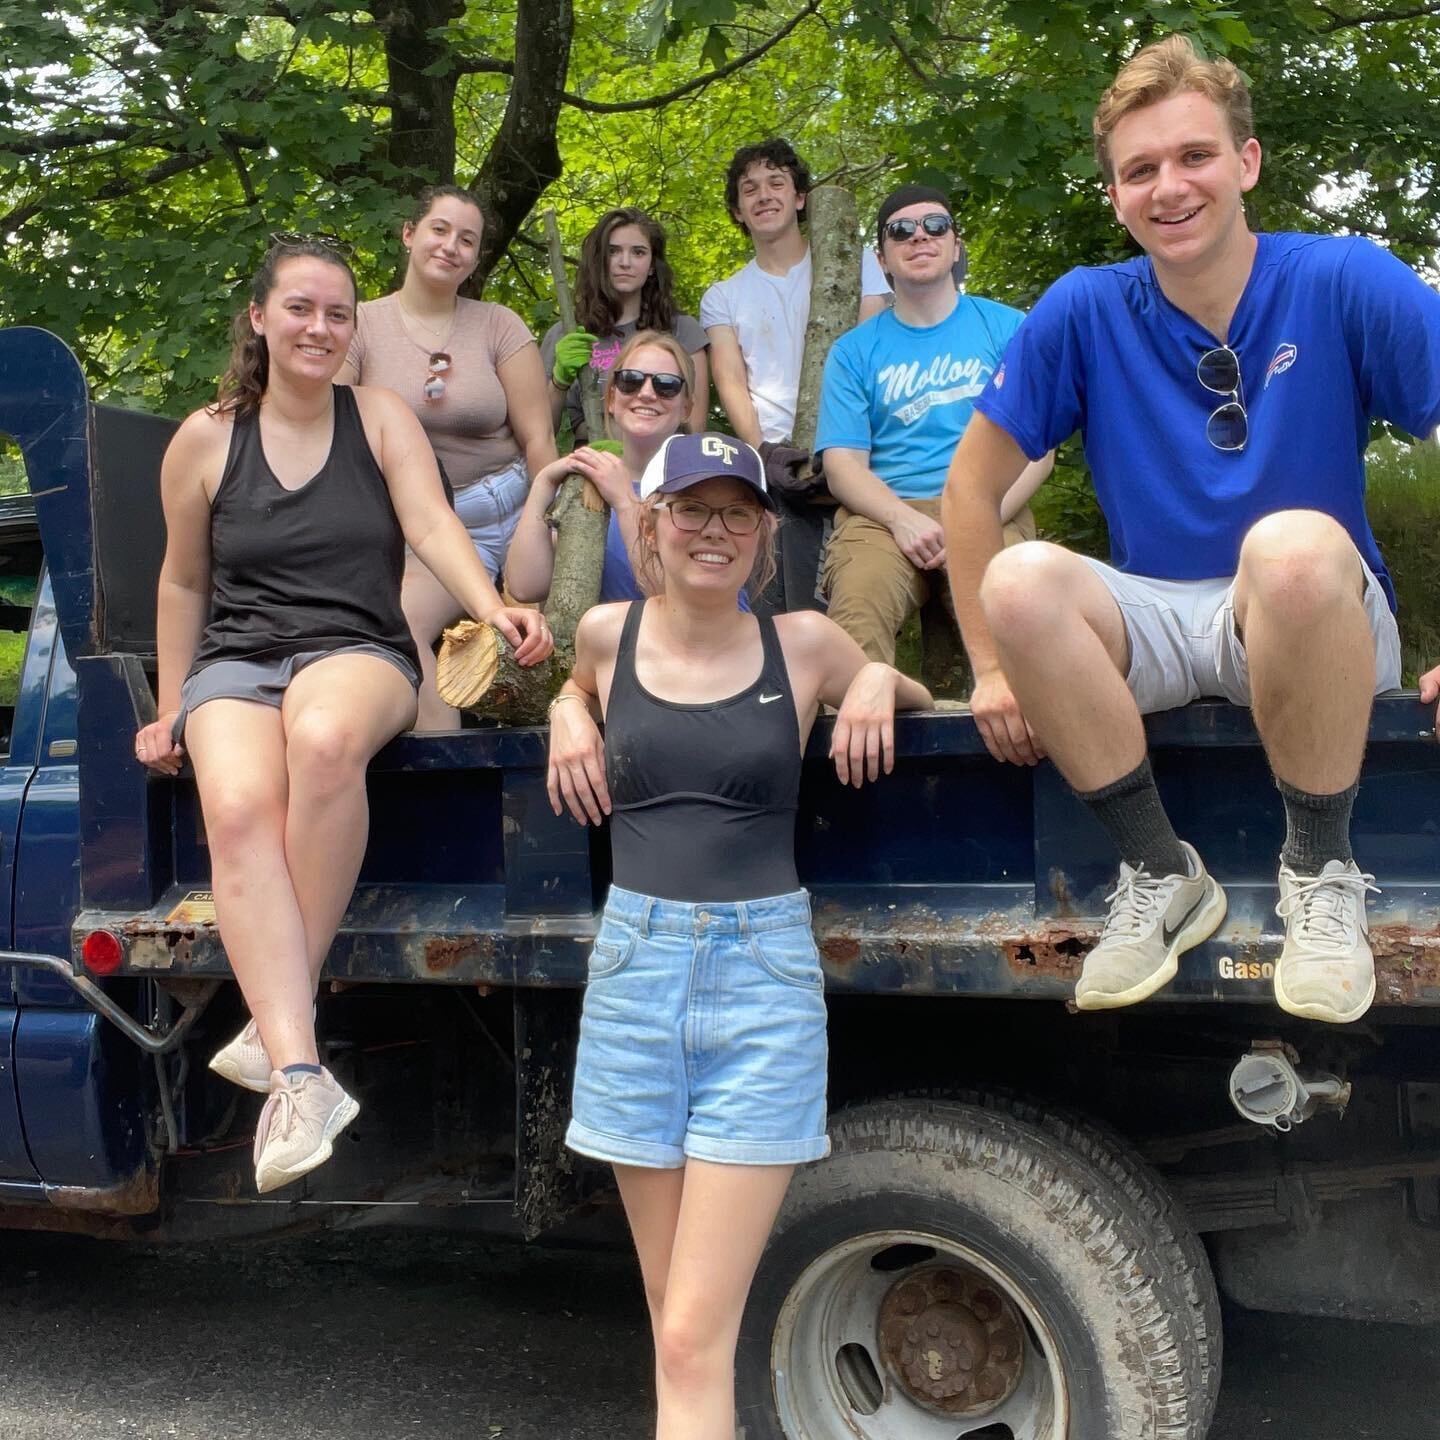 We just capped off our first-ever community service tour!🎊💪 
&bull;
From Sunday-Wednesday, fully vaccinated members of Note to Self volunteered at Camp Nooteeming in Salt Point and the Marist Brothers&rsquo; Center at Esopus to help the properties 